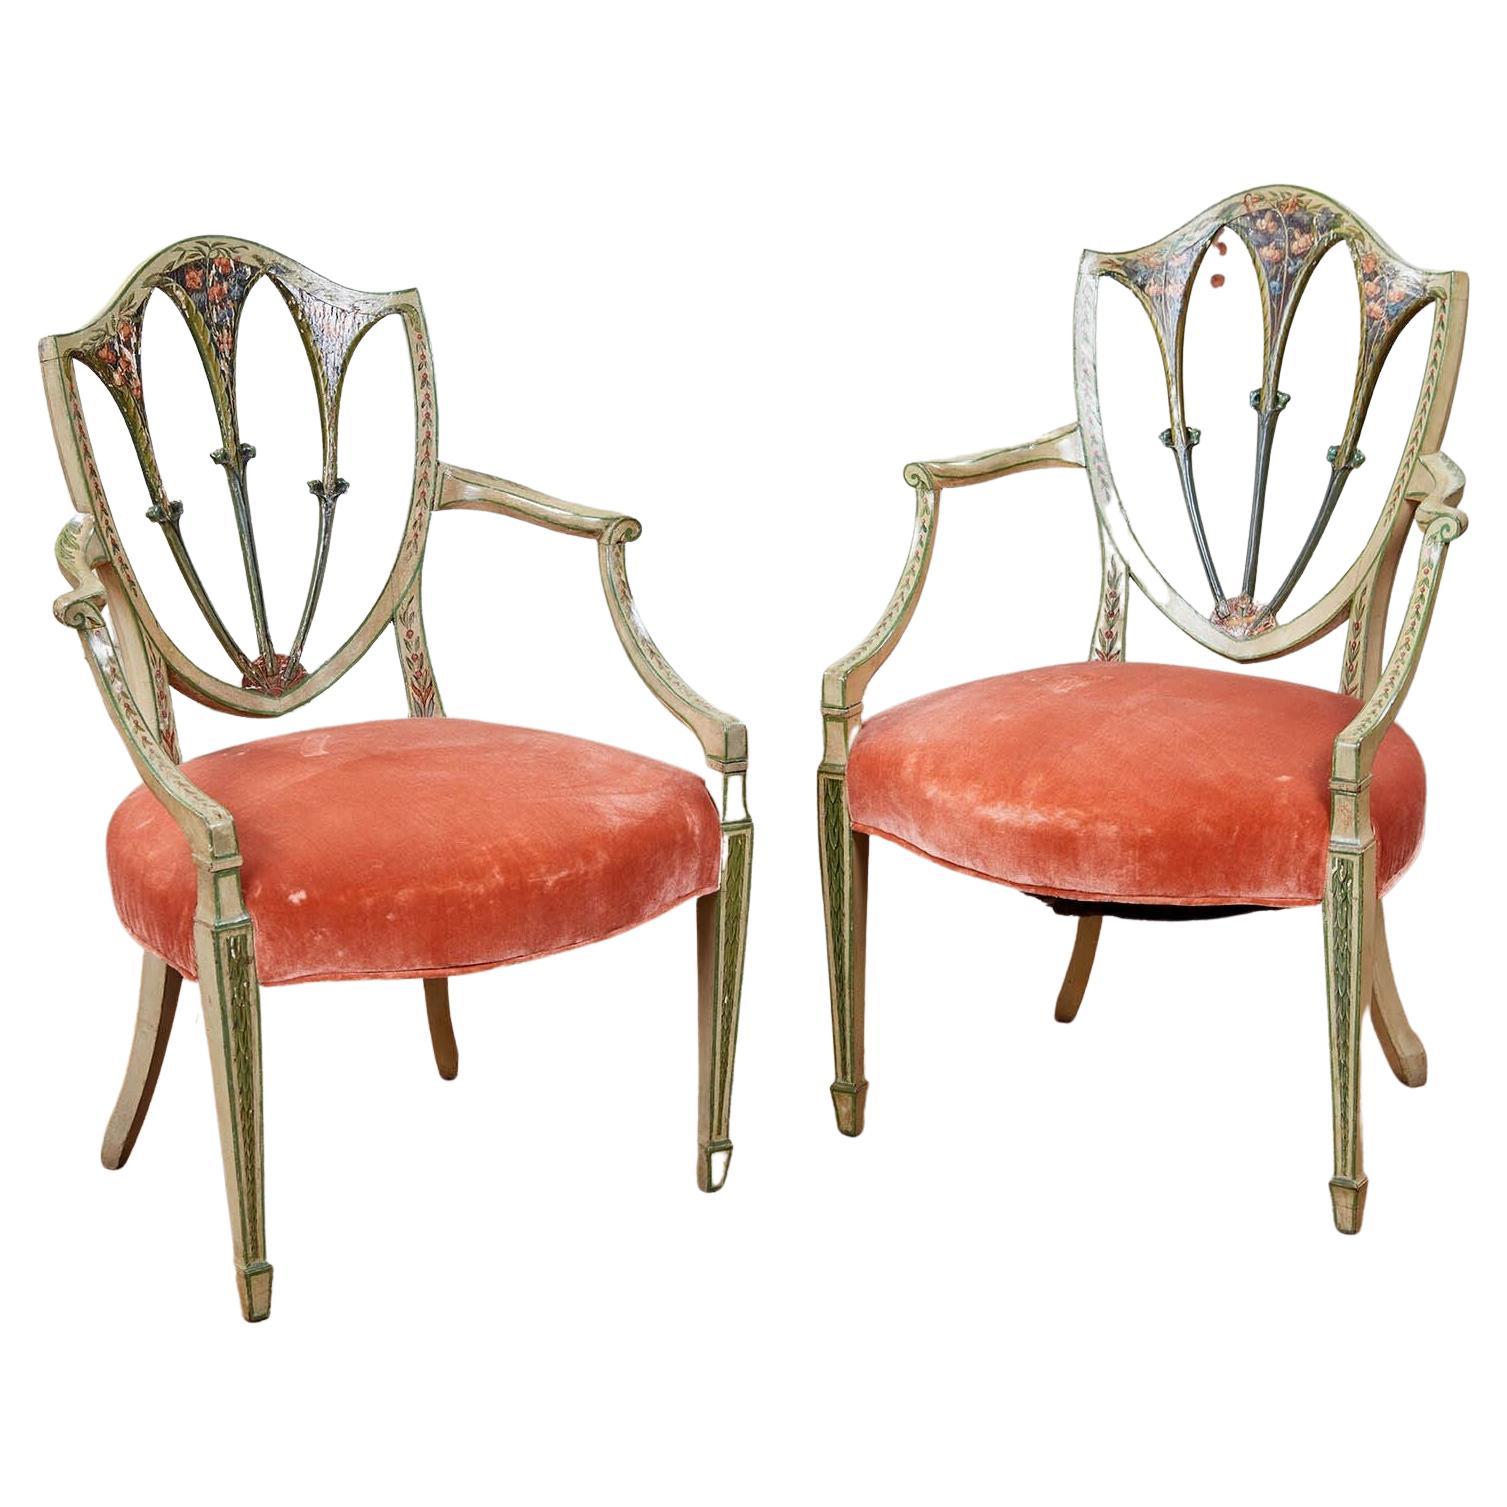 Elegant Pair of English 18th C. Painted Armchairs For Sale